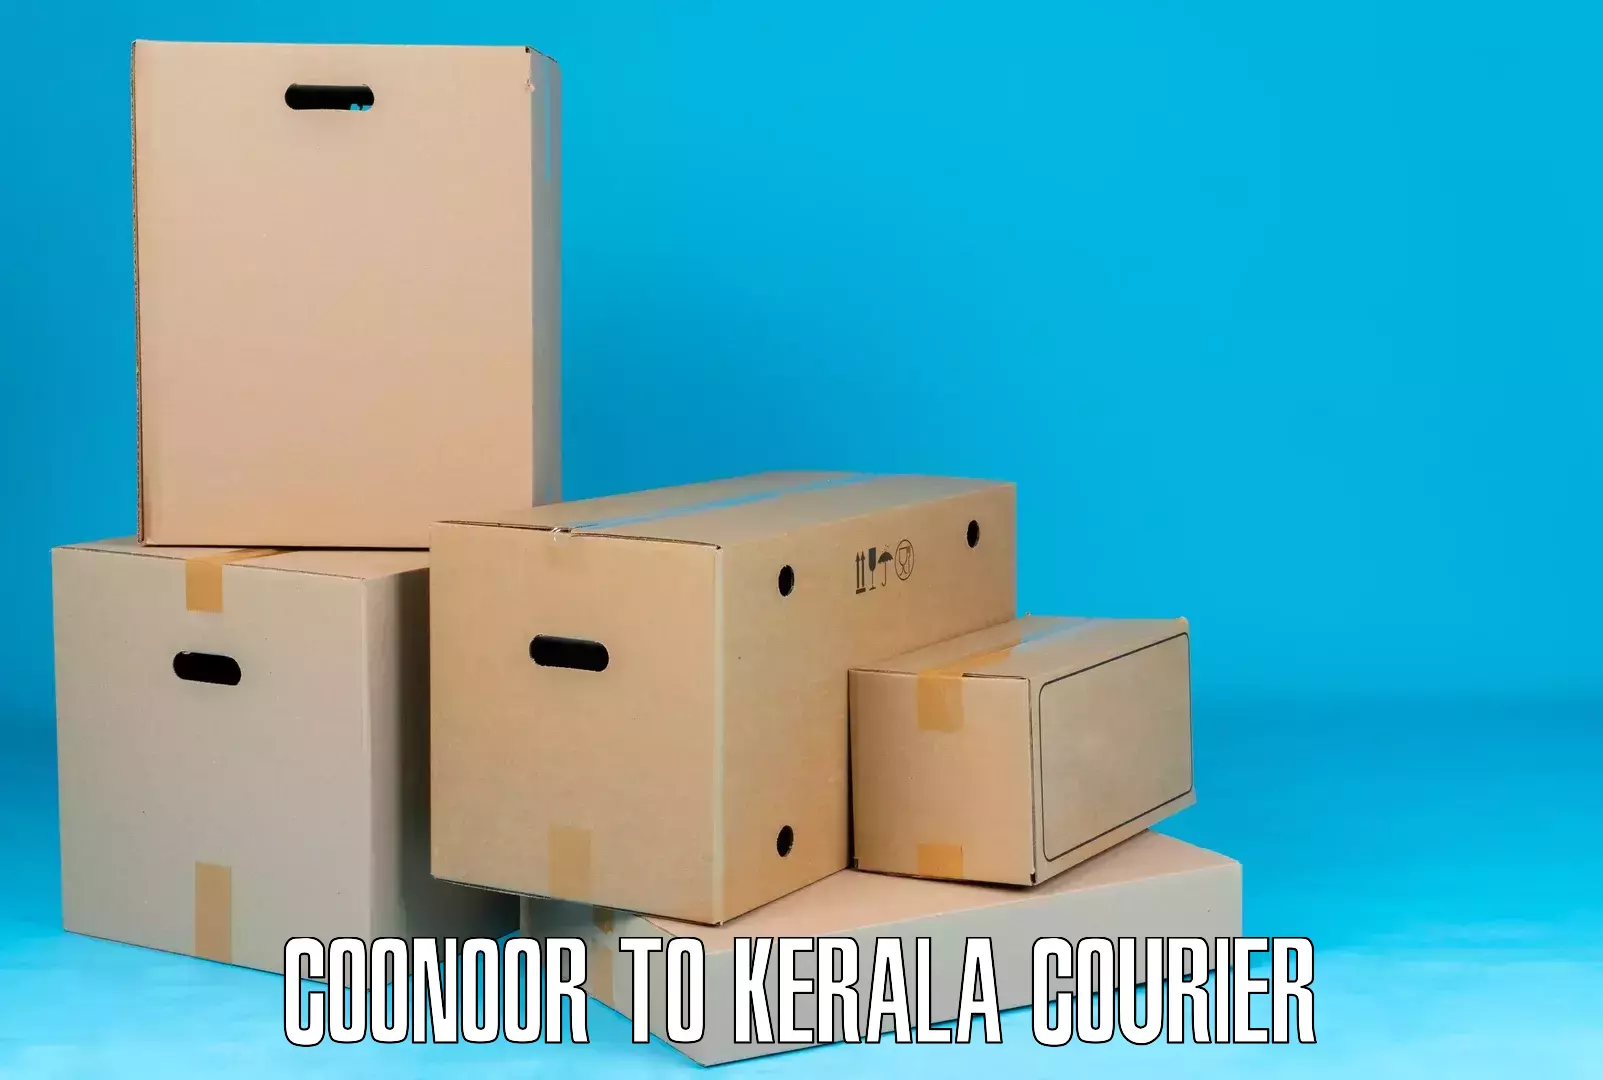 Business shipping needs Coonoor to Piravom